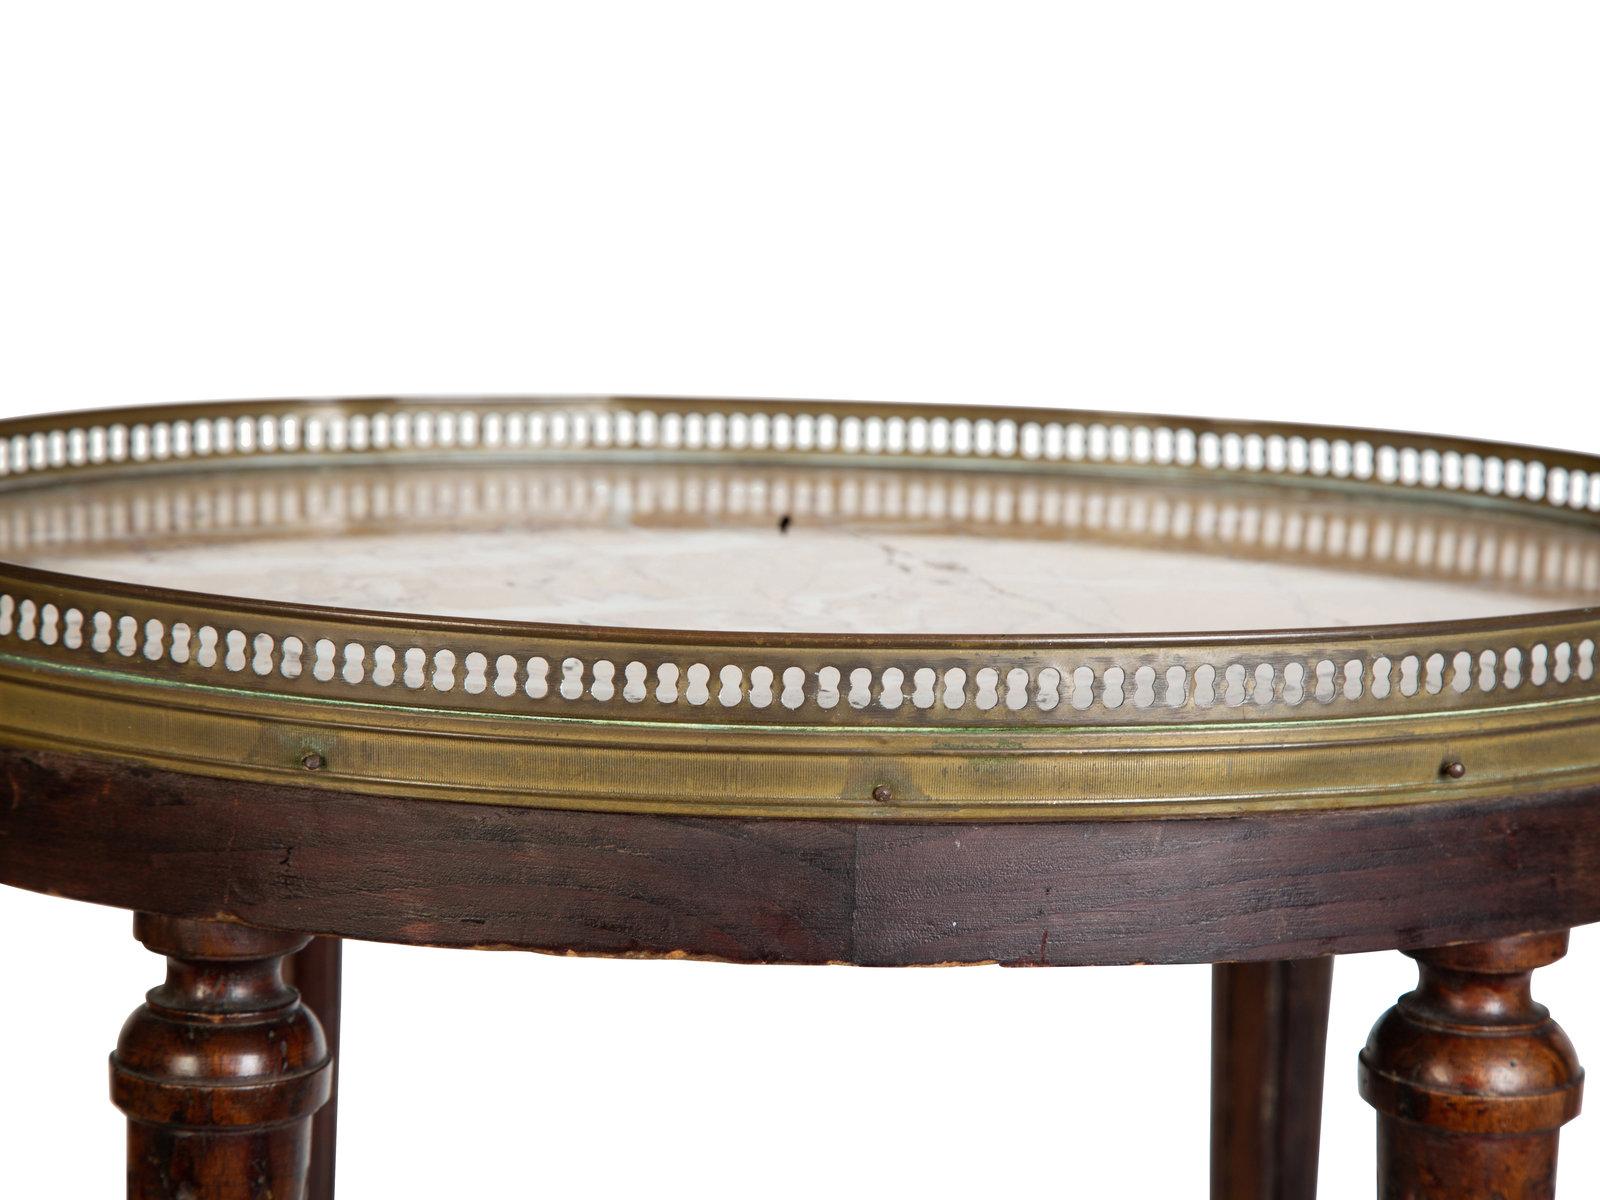 French Round Marble Top Side Table with a Gallery and Reeded Legs, Late 19th Century